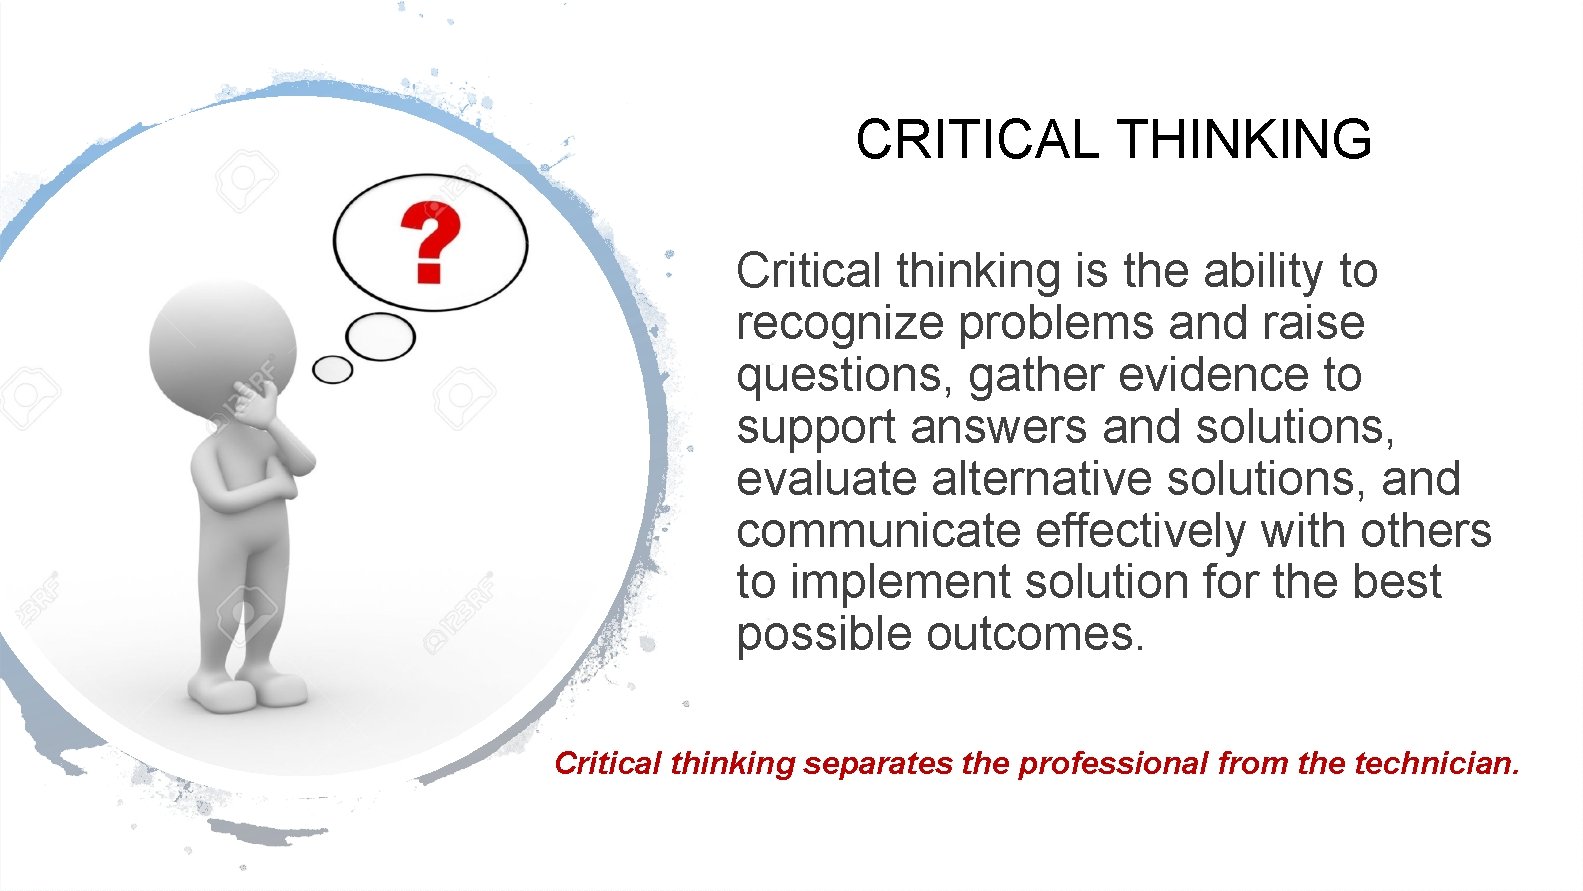 CRITICAL THINKING Critical thinking is the ability to recognize problems and raise questions, gather